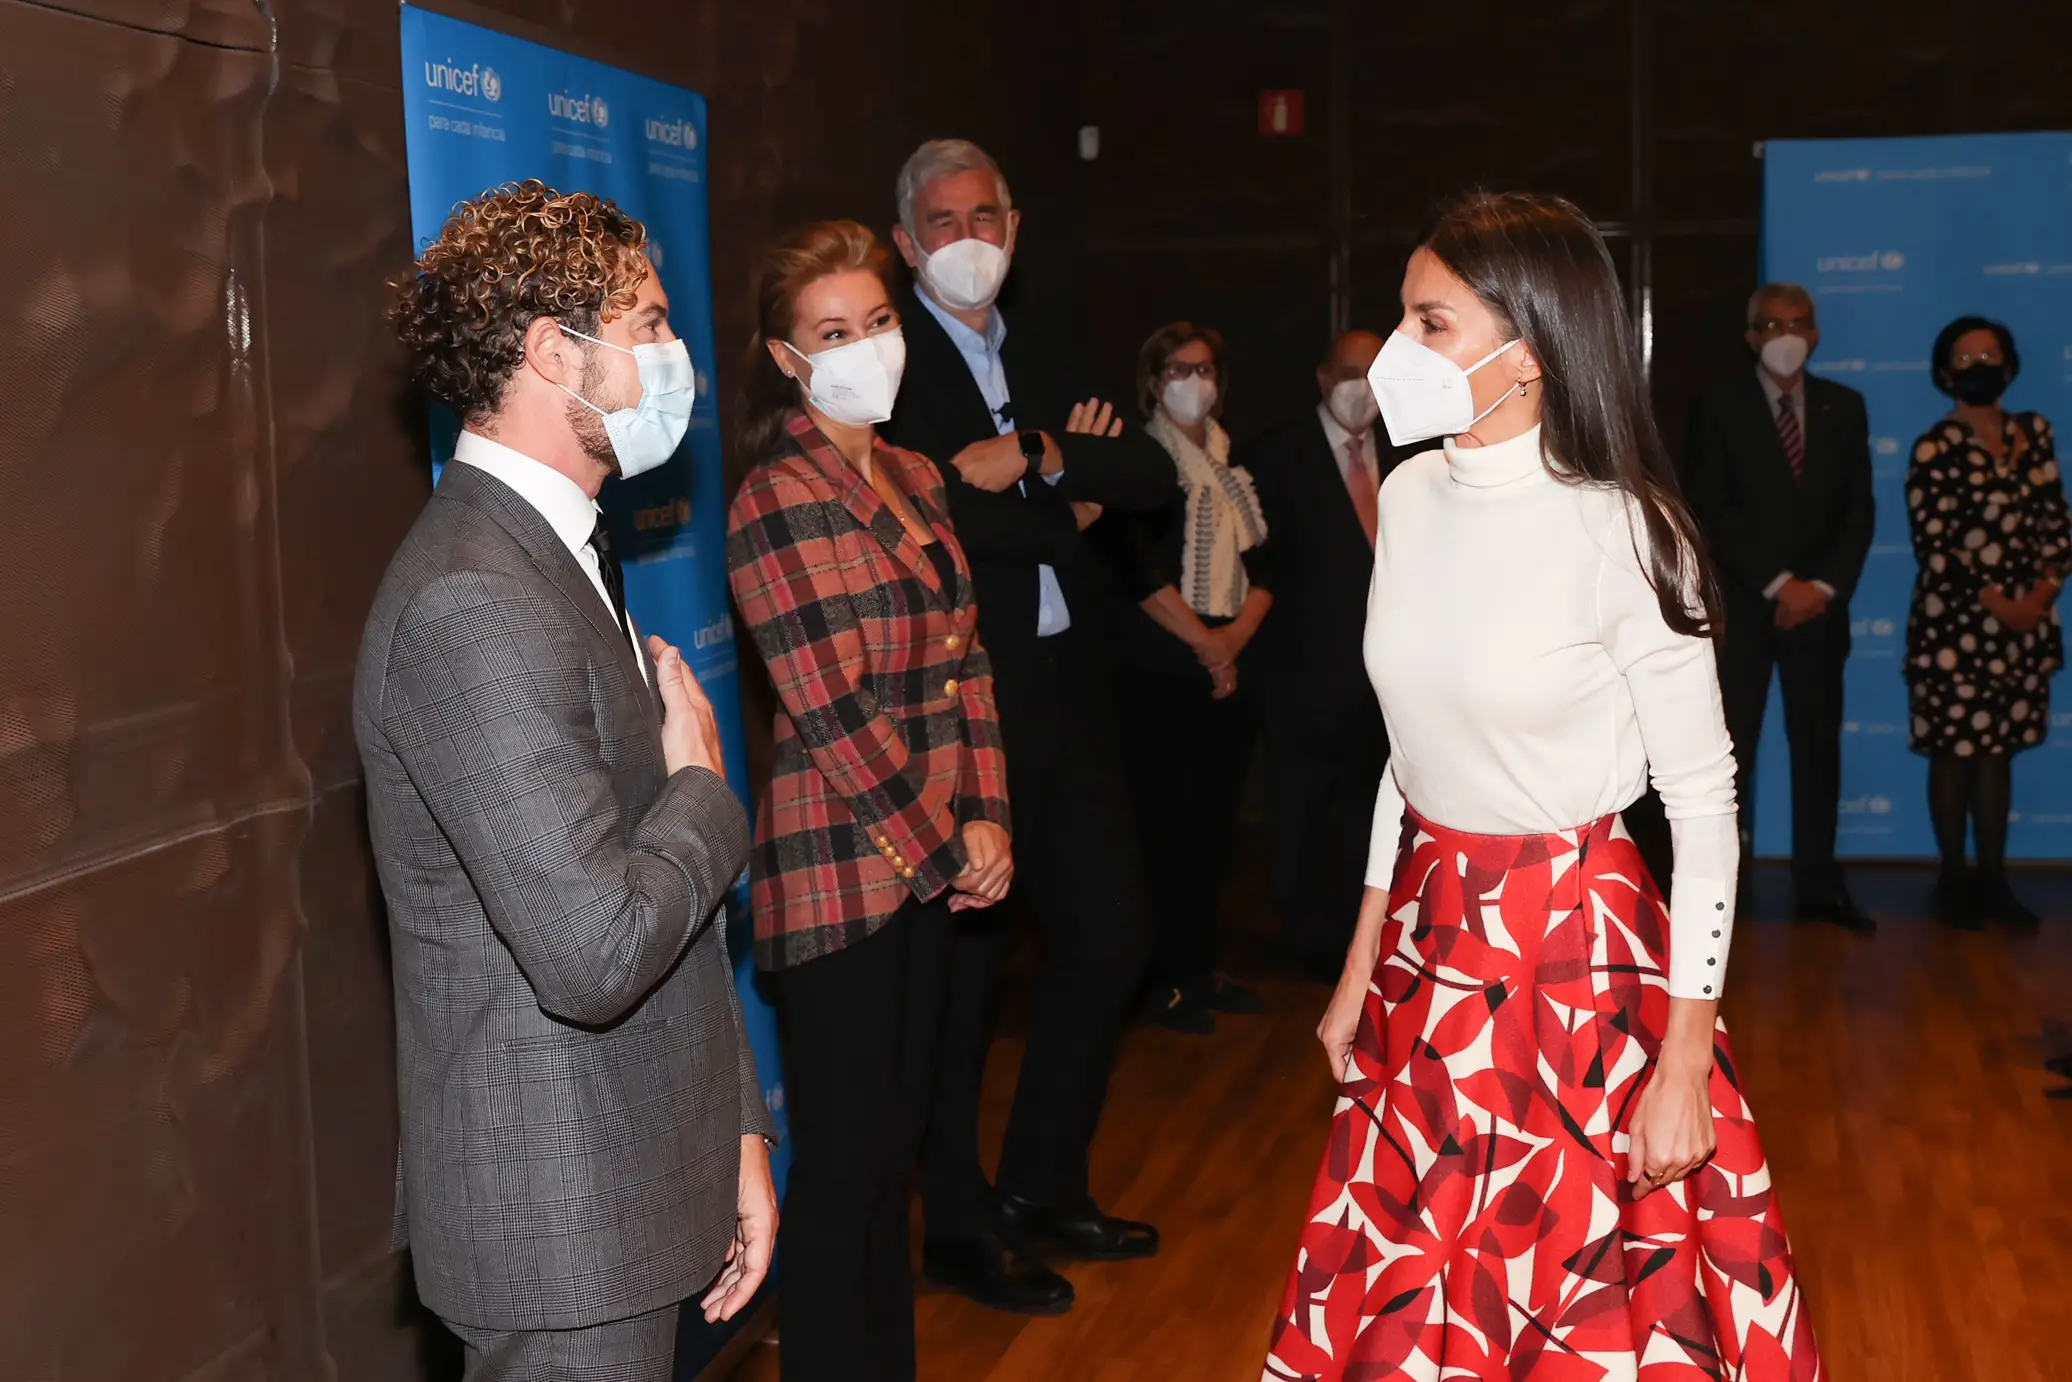 Queen Letizia of Spain, The Honorary President of UNICEF Spanish Committee, presided over the event commemorating the 75th anniversary of UNICEF at the CaixaForum in Madrid